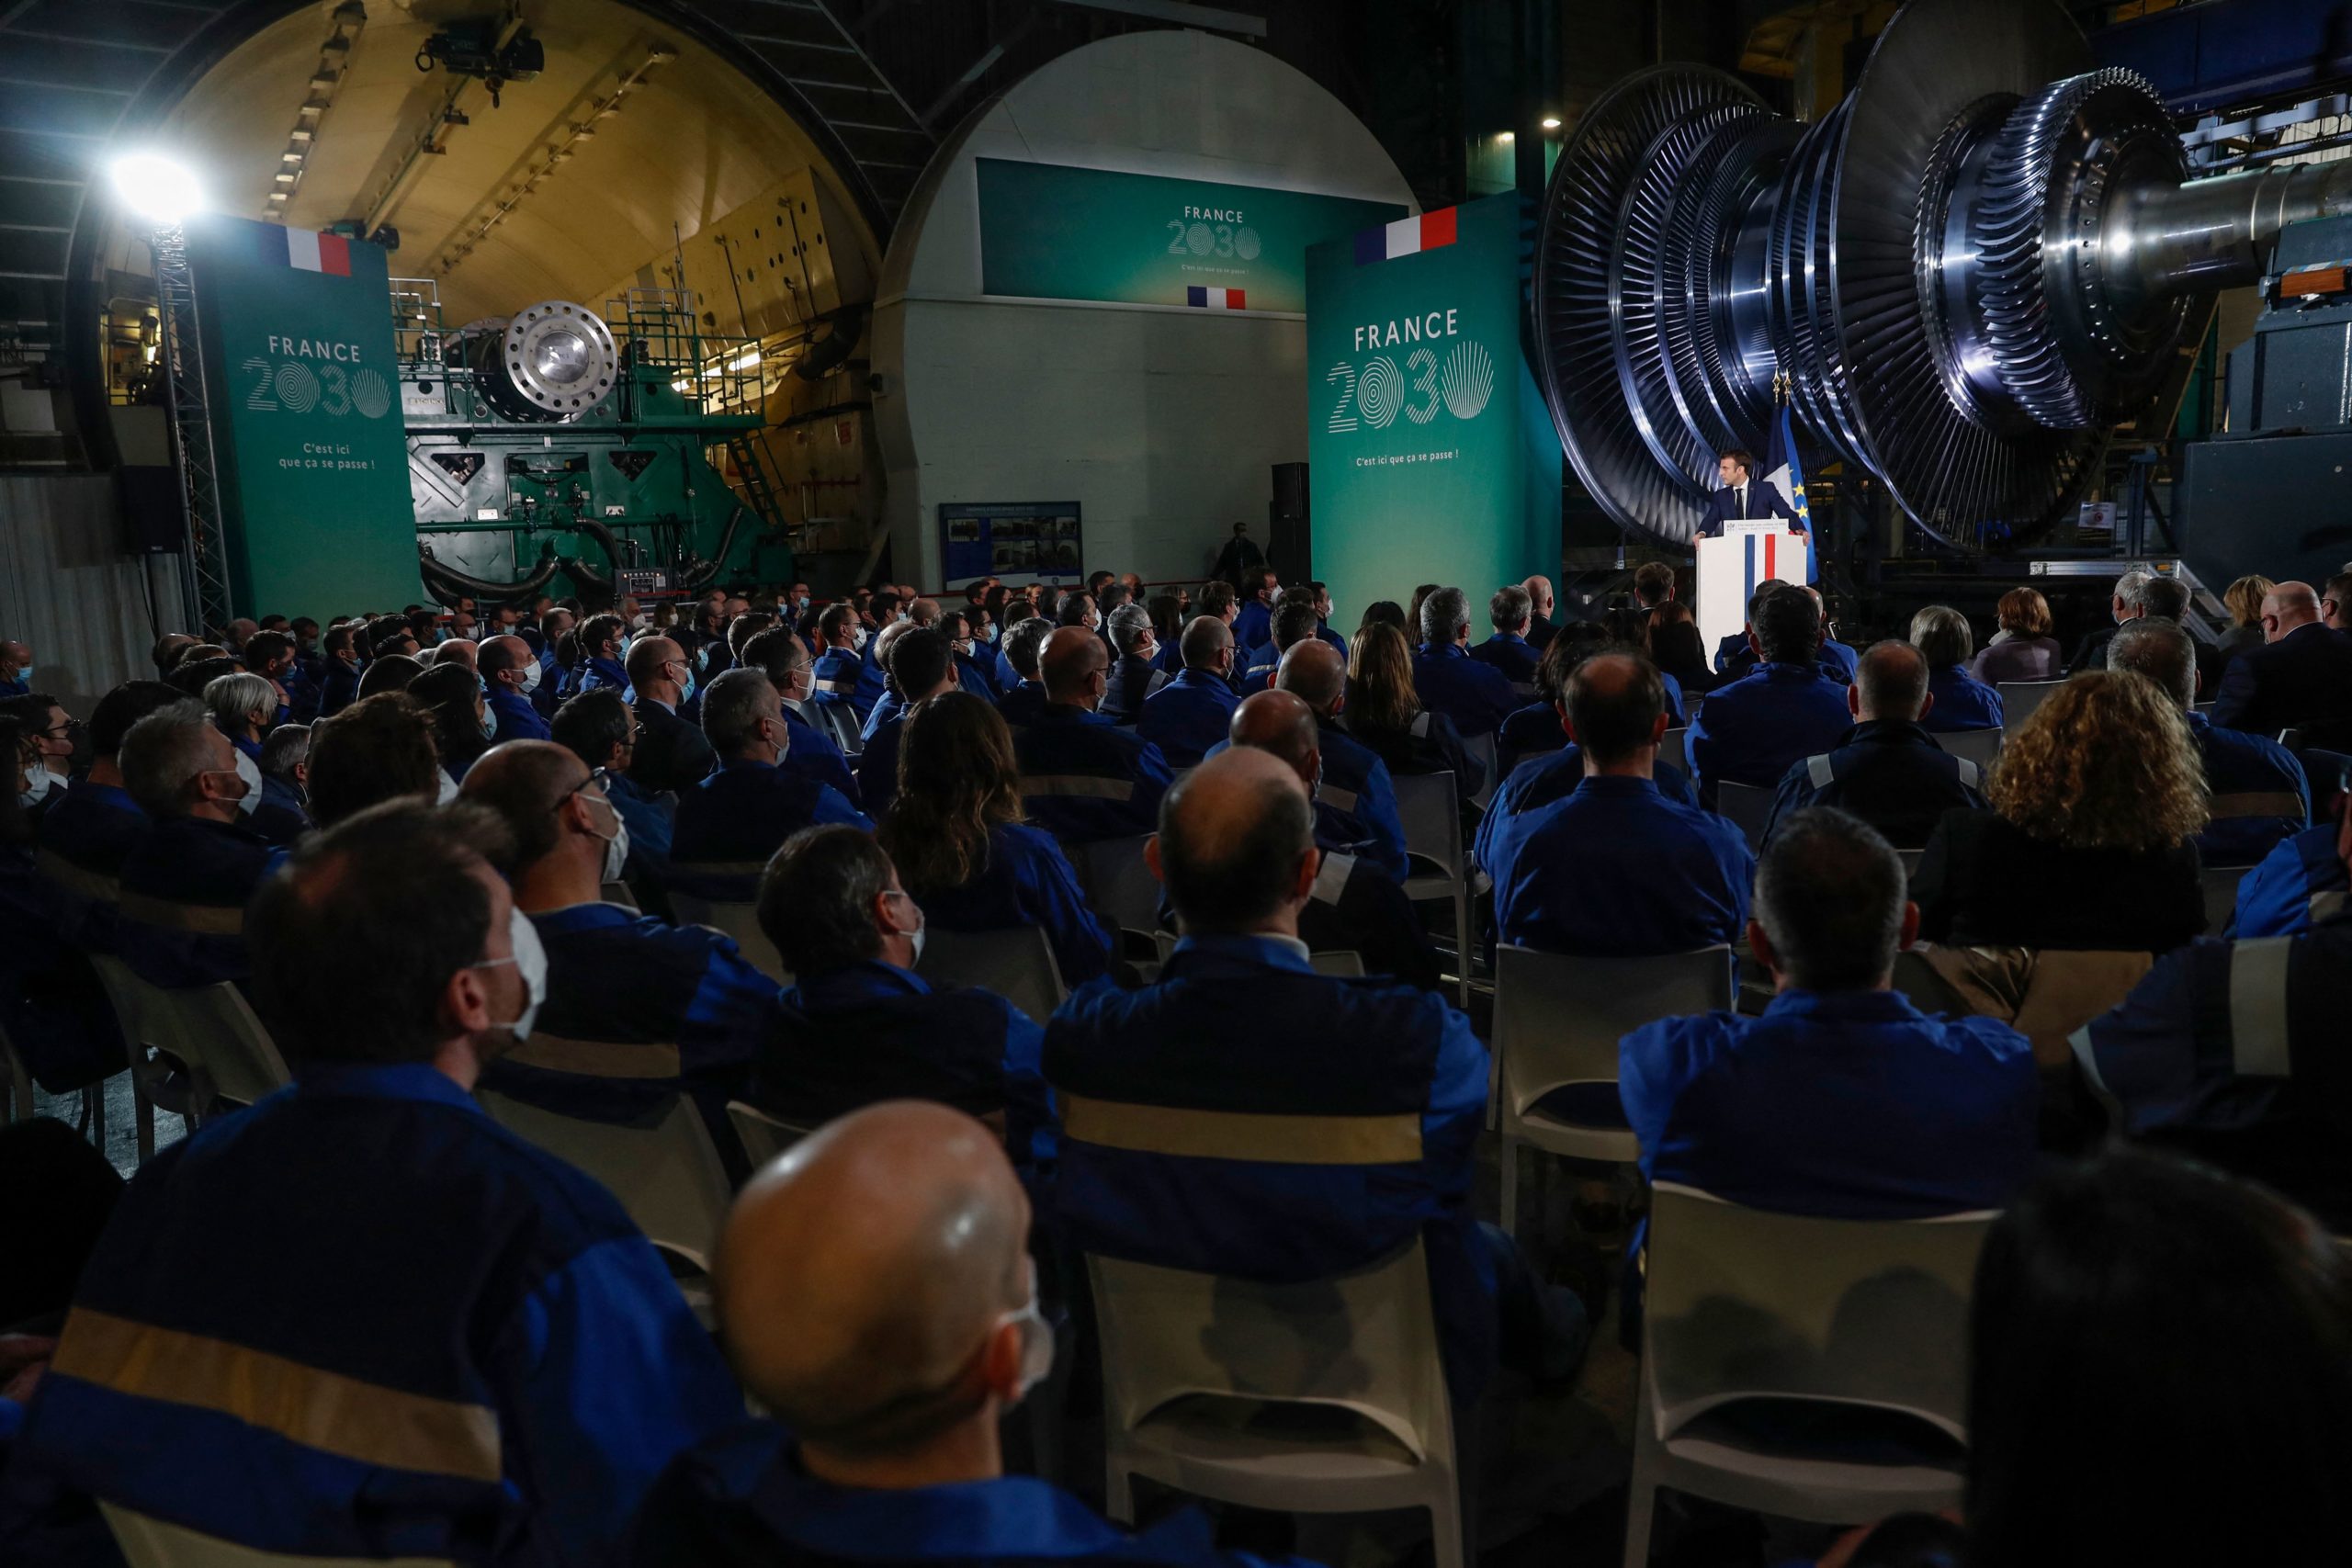 French President Emmanuel Macron delivers a speech at a production site for a nuclear turbine system in Belfort, France, on Thursday. (Jean-Francois Badias/Pool/AFP via Getty Images)